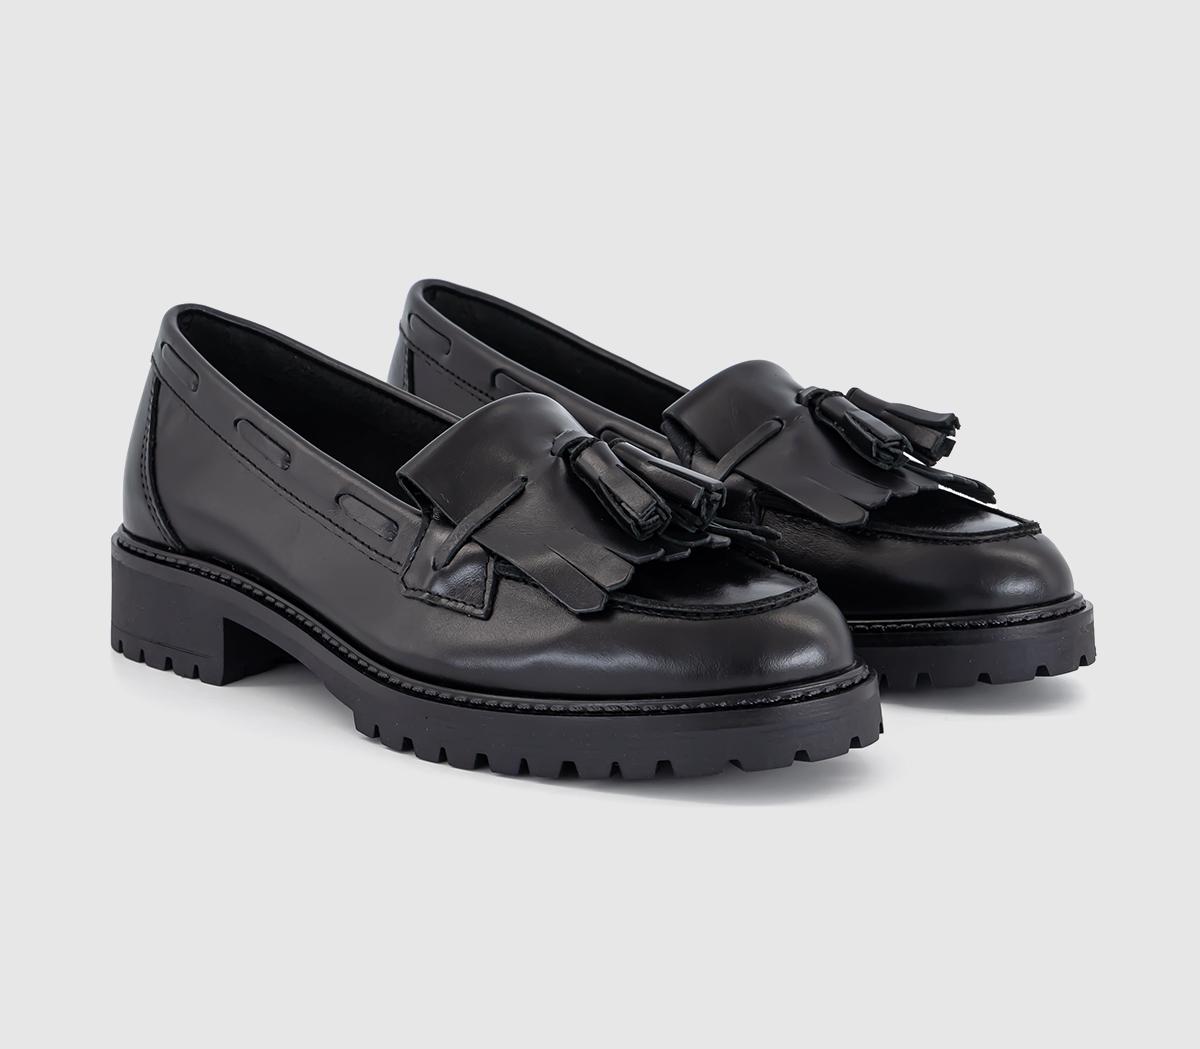 OFFICE Womens Frey Fringe Tassel Cleated Loafers Black Leather, 4